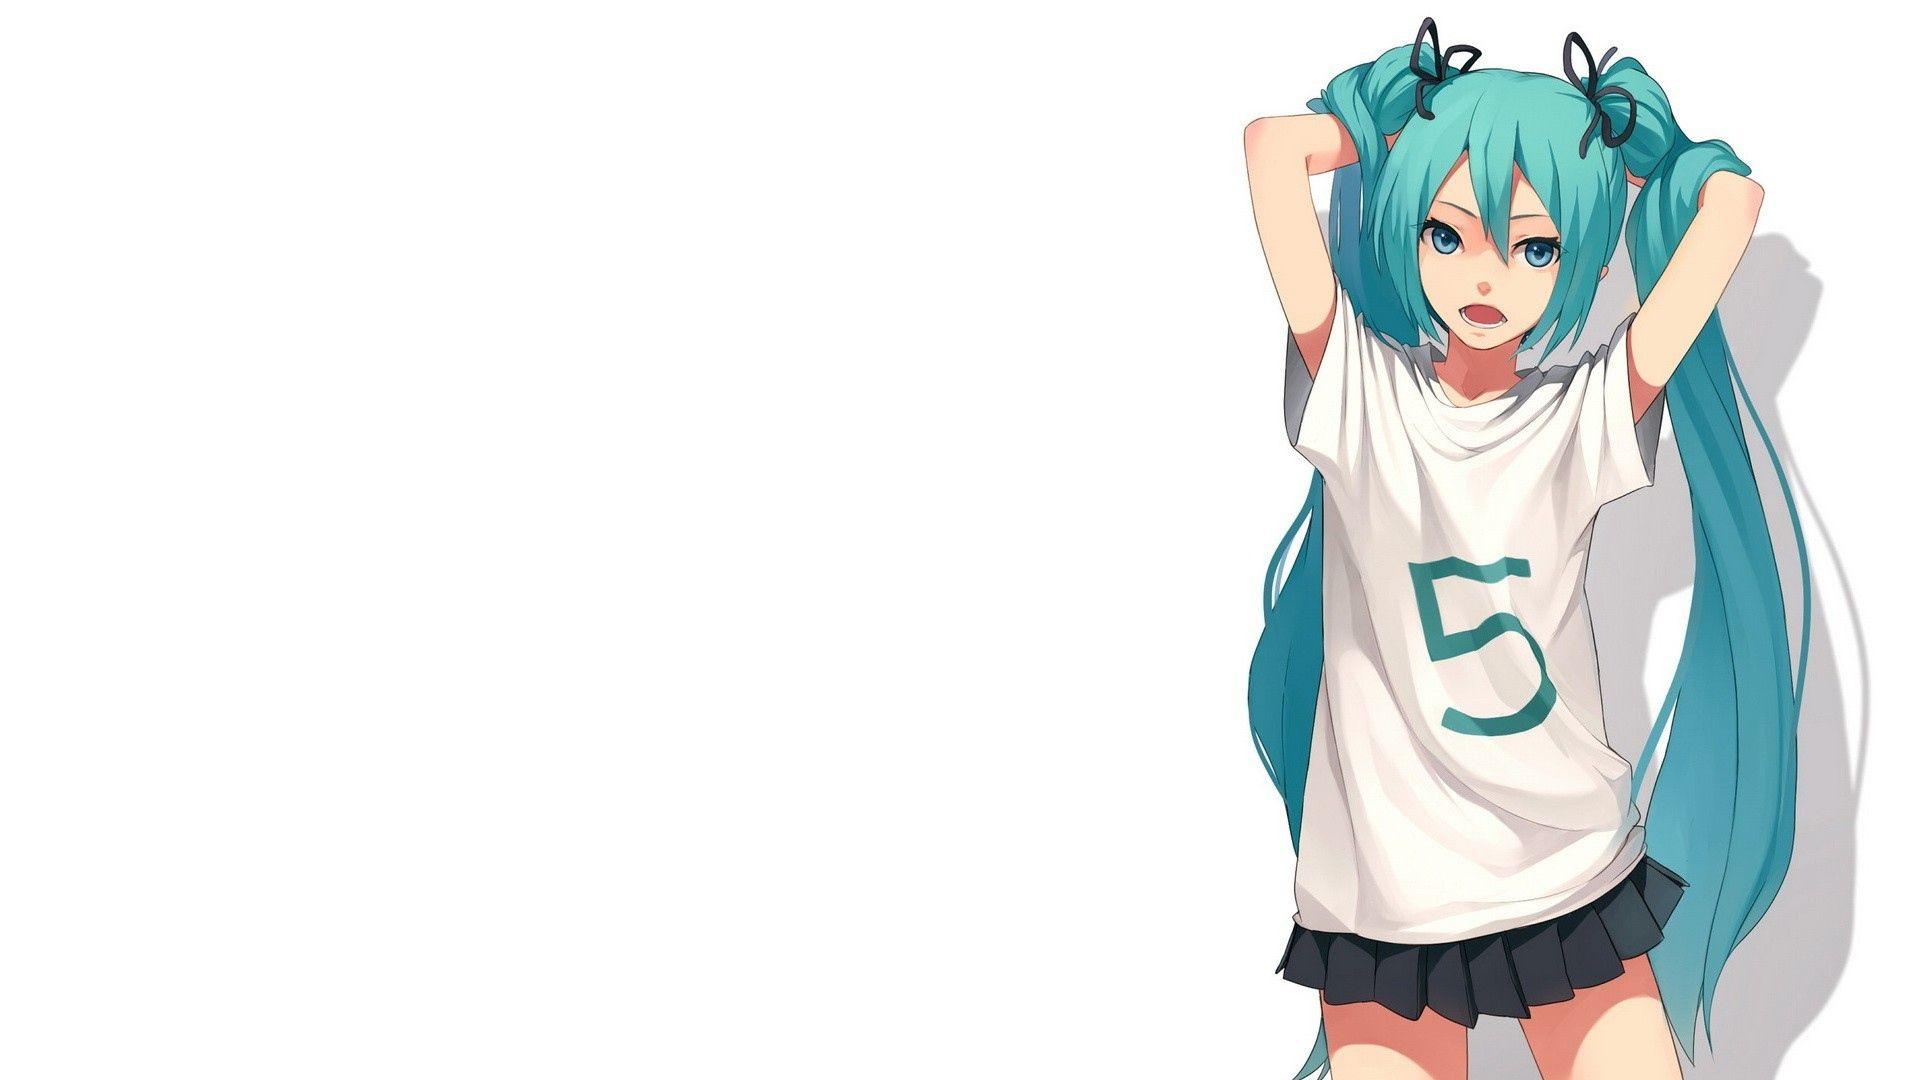 By Toni Popp Miku, 1920x1080 px for desktop and mobile